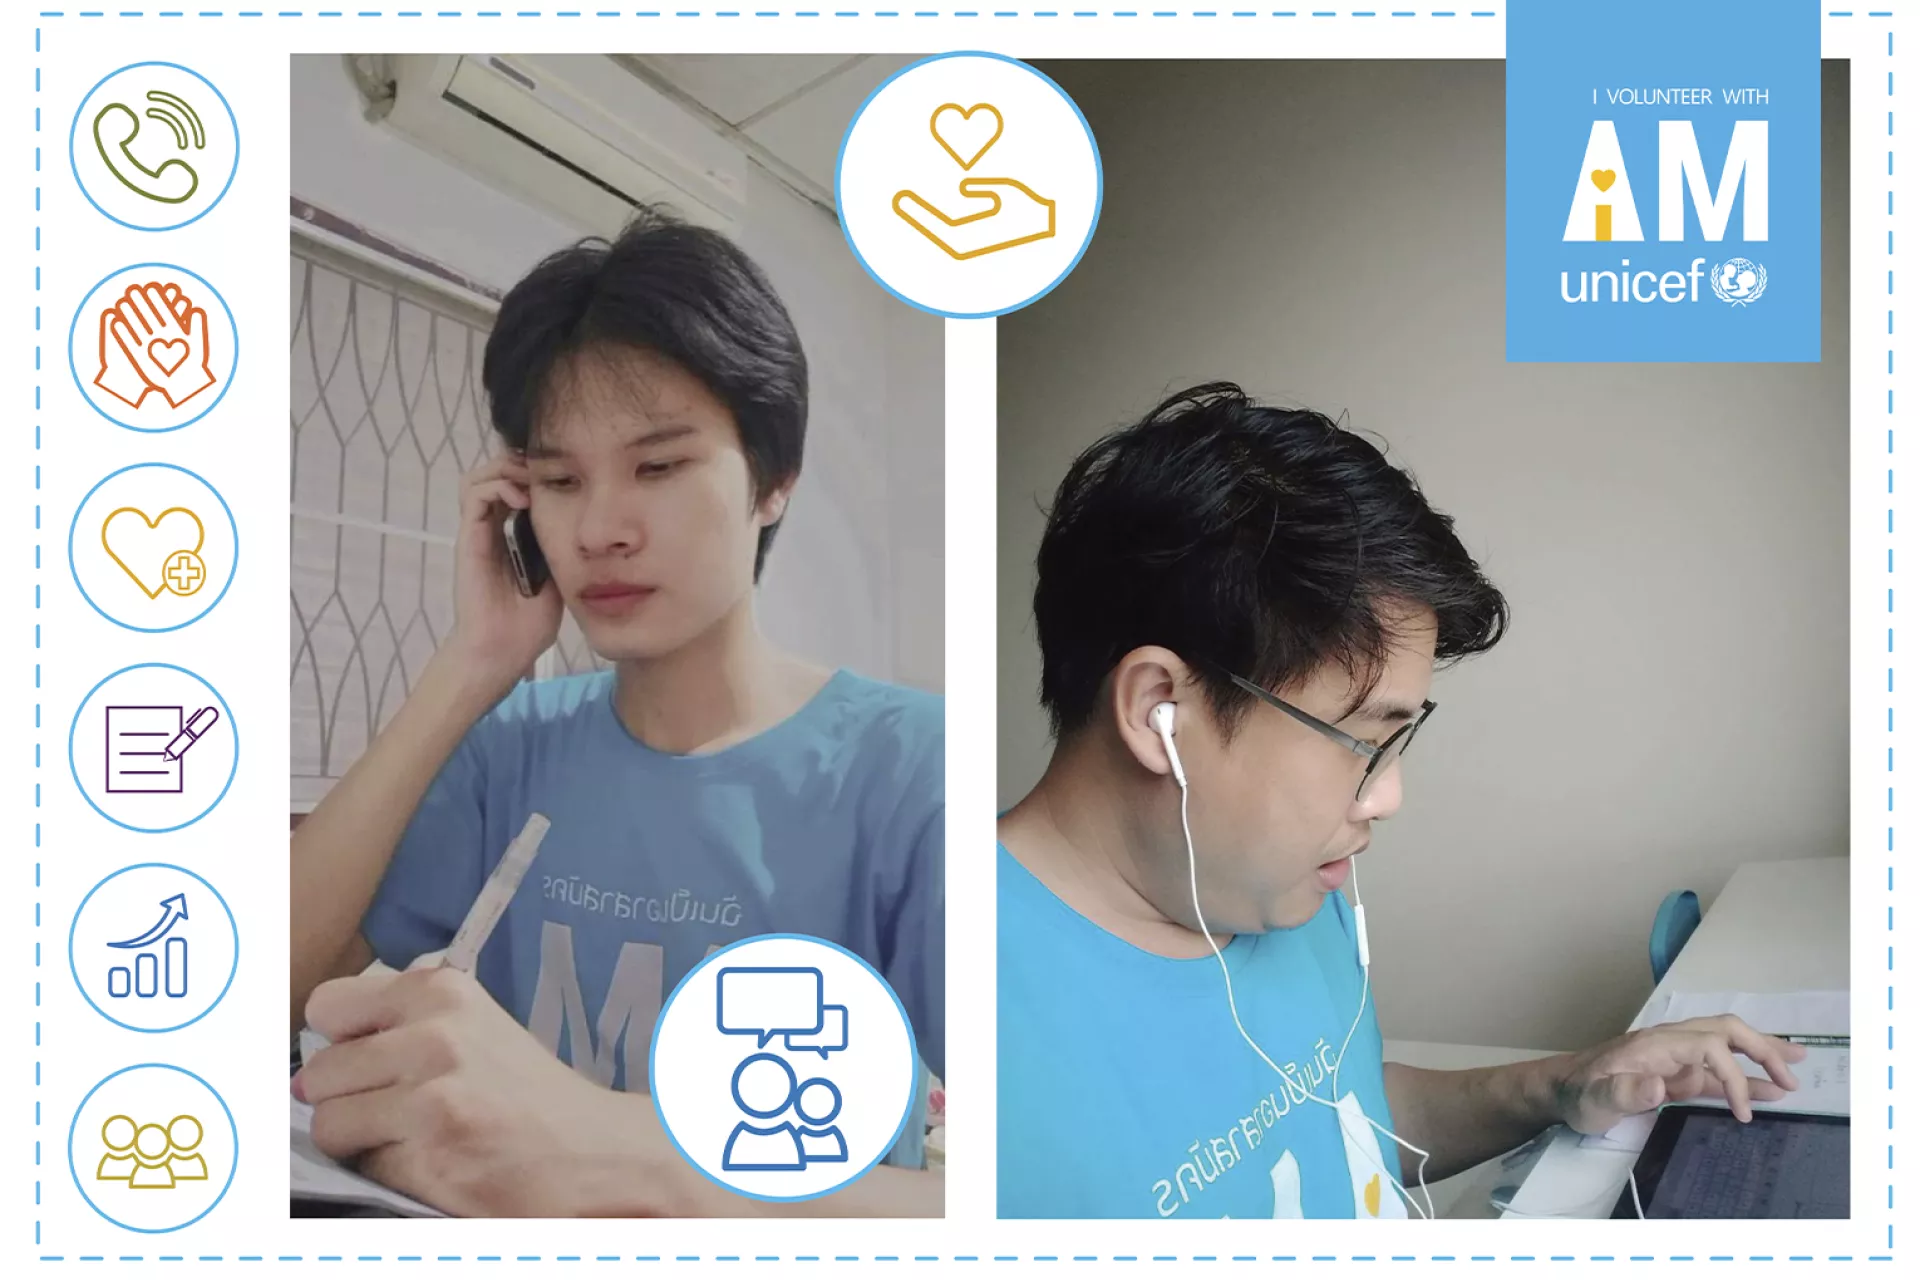 Young volunteers from Thailand are doing volunteer work remotely on their devices at home.